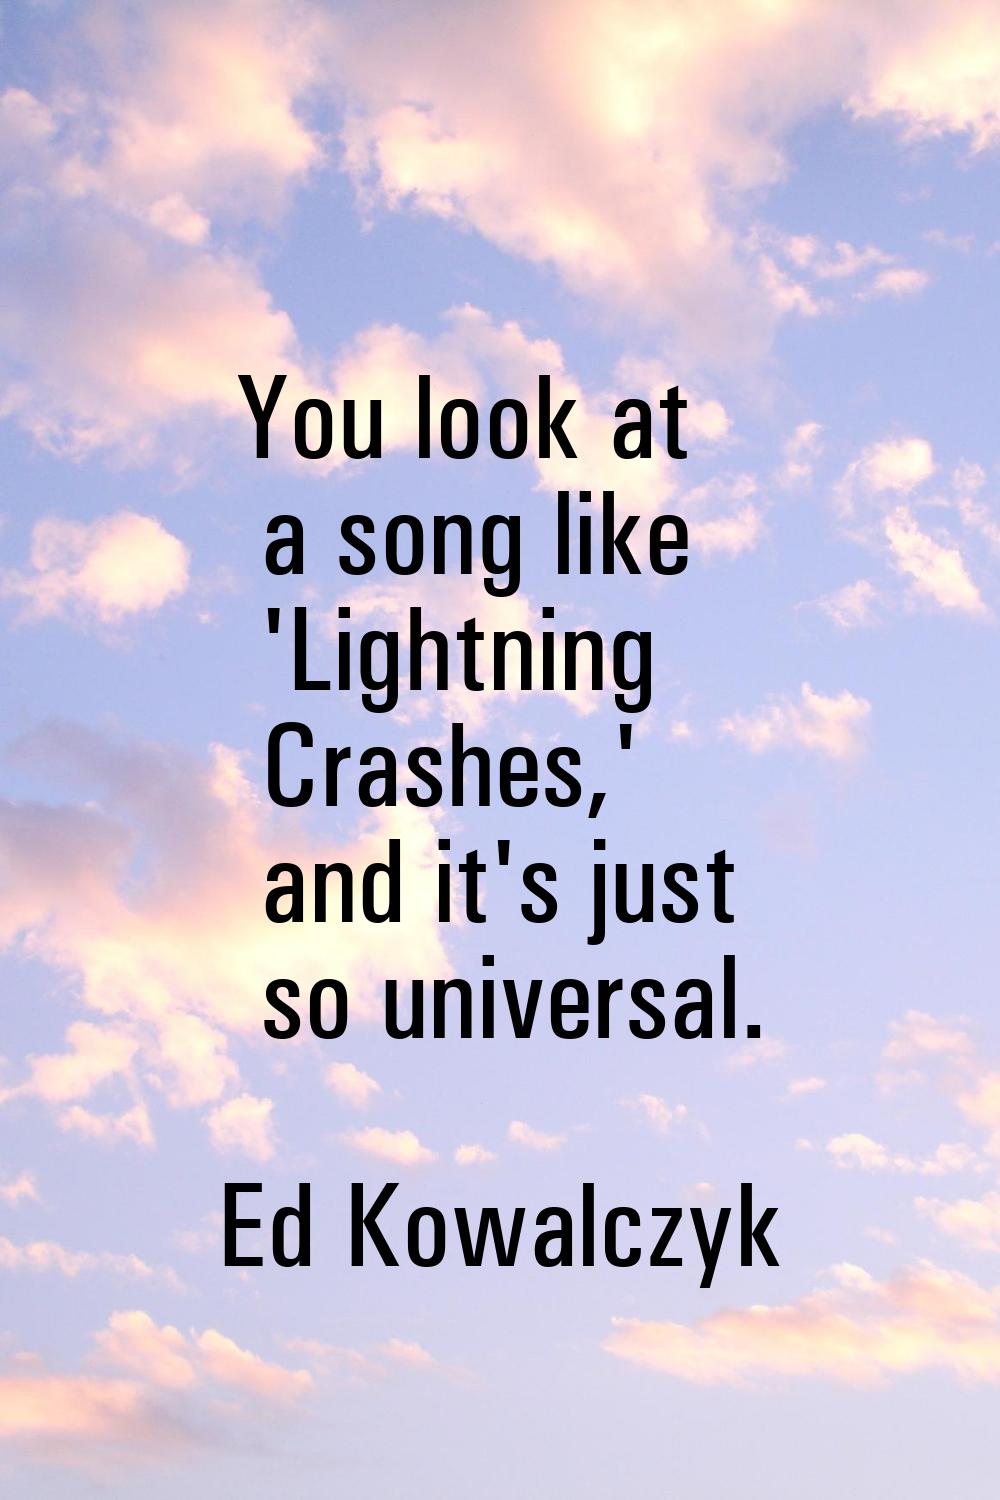 You look at a song like 'Lightning Crashes,' and it's just so universal.